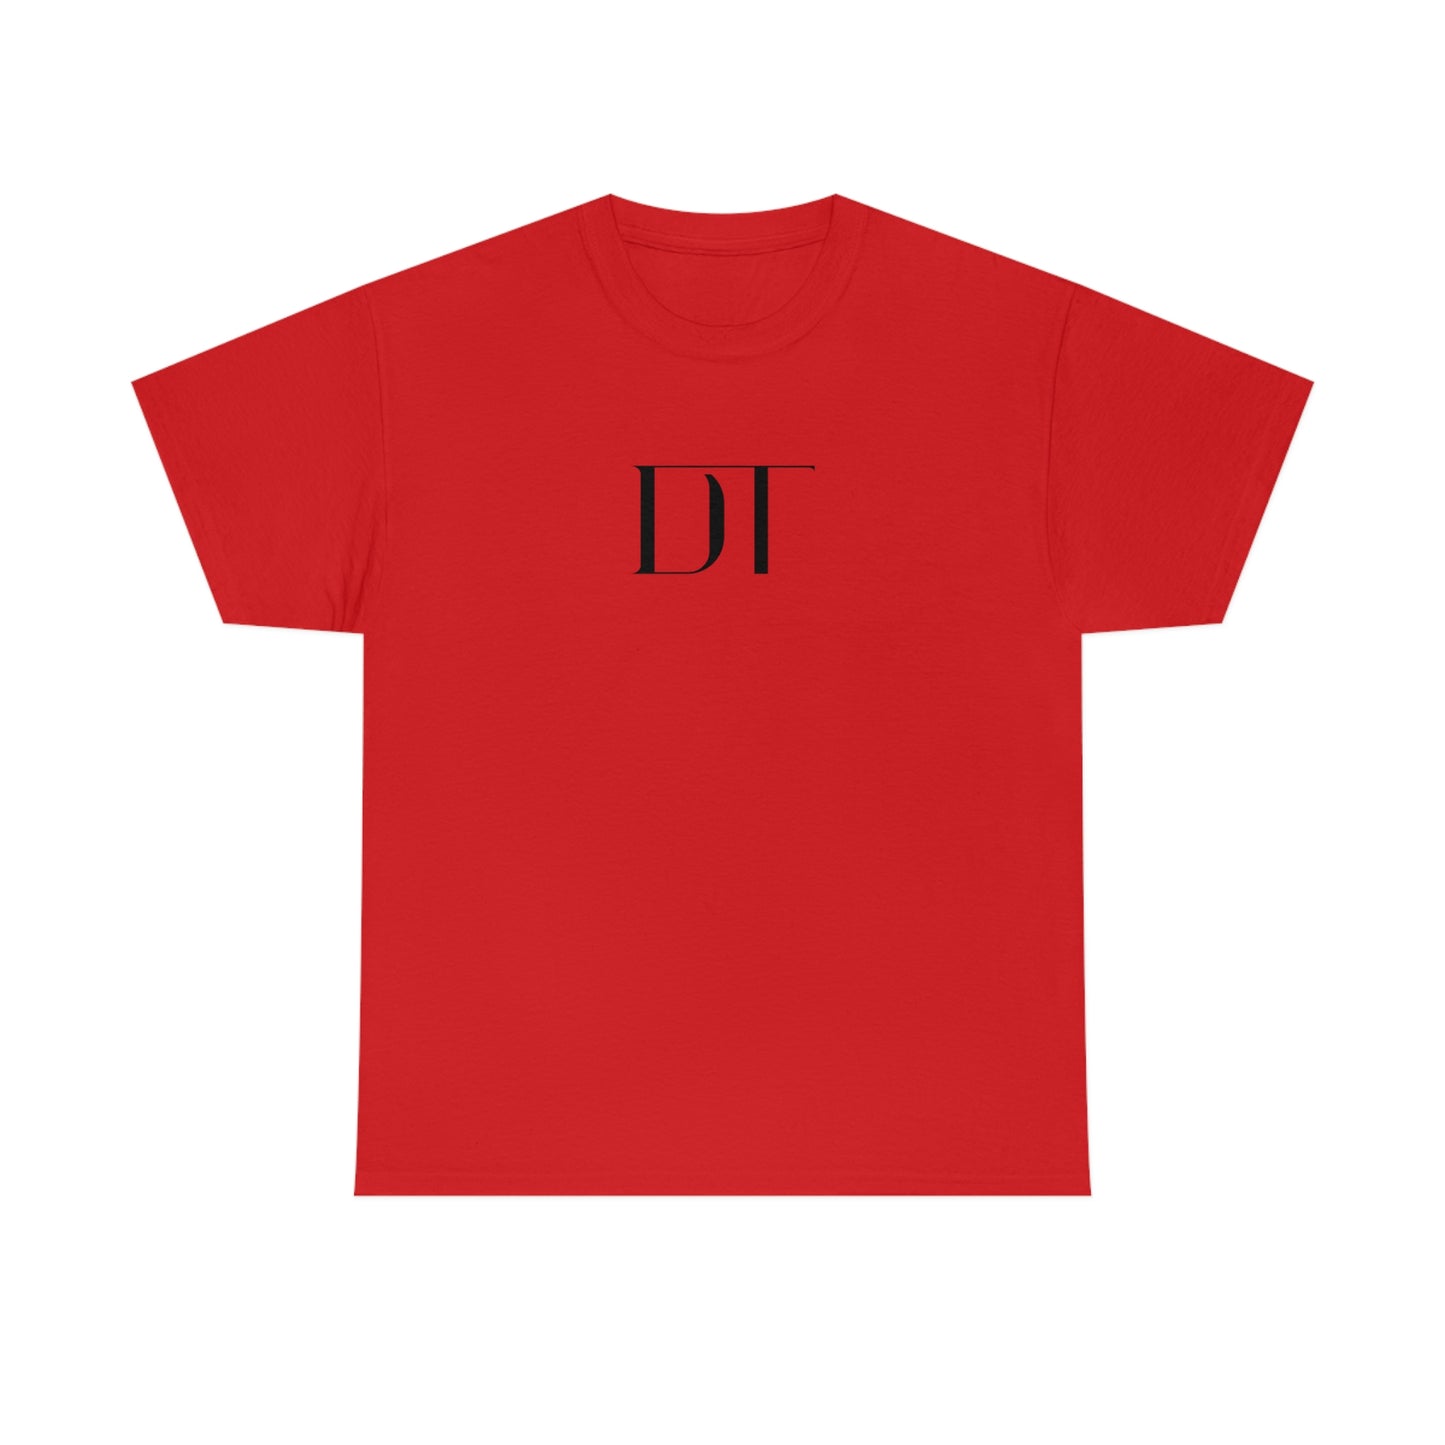 Devin Tolbert "DT" Double Sided Tee